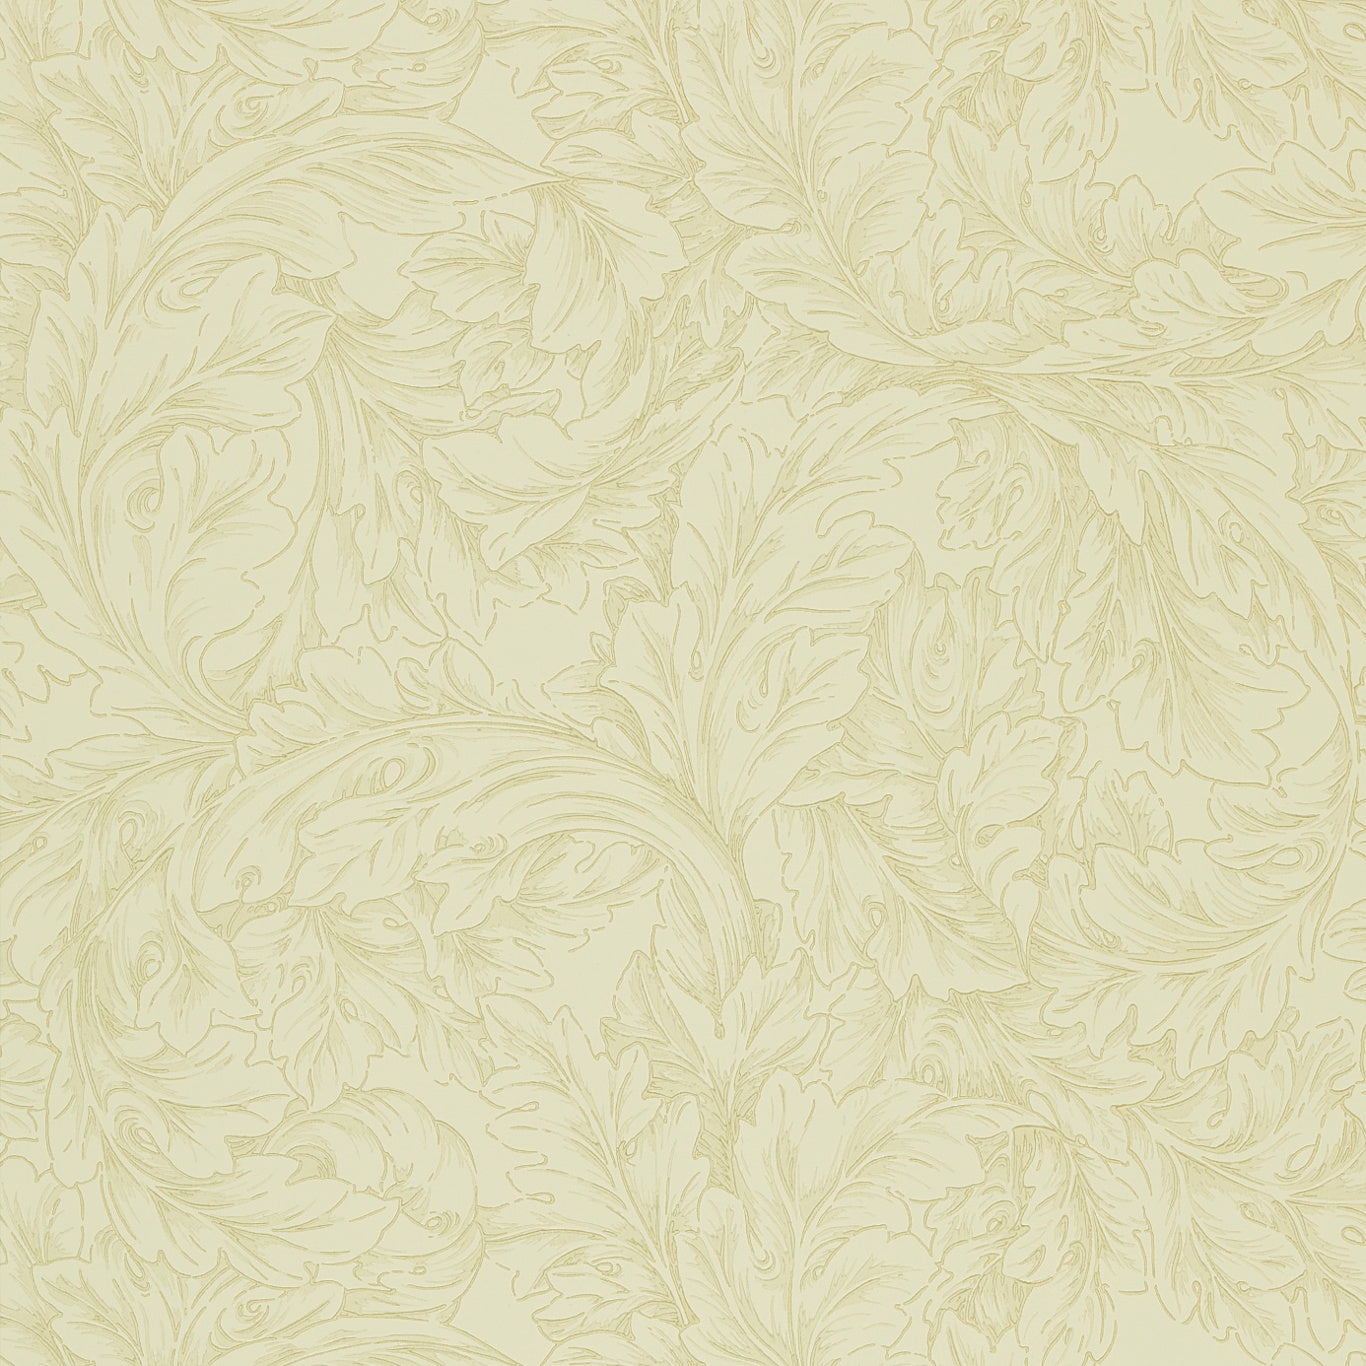 Acanthus Scroll Wallpaper by Morris & Co